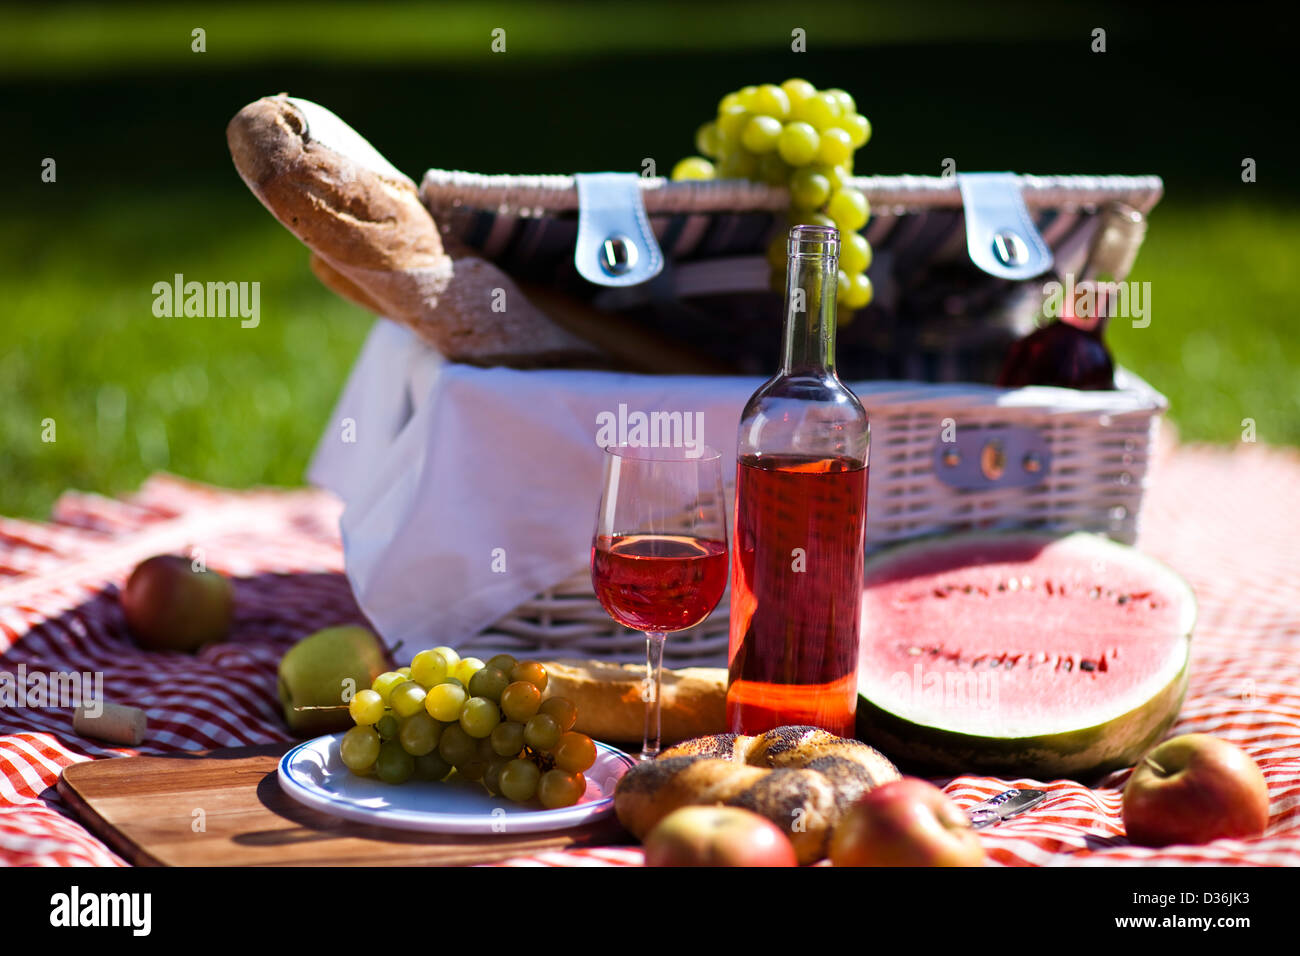 Wine and picnic basket on the grass Stock Photo